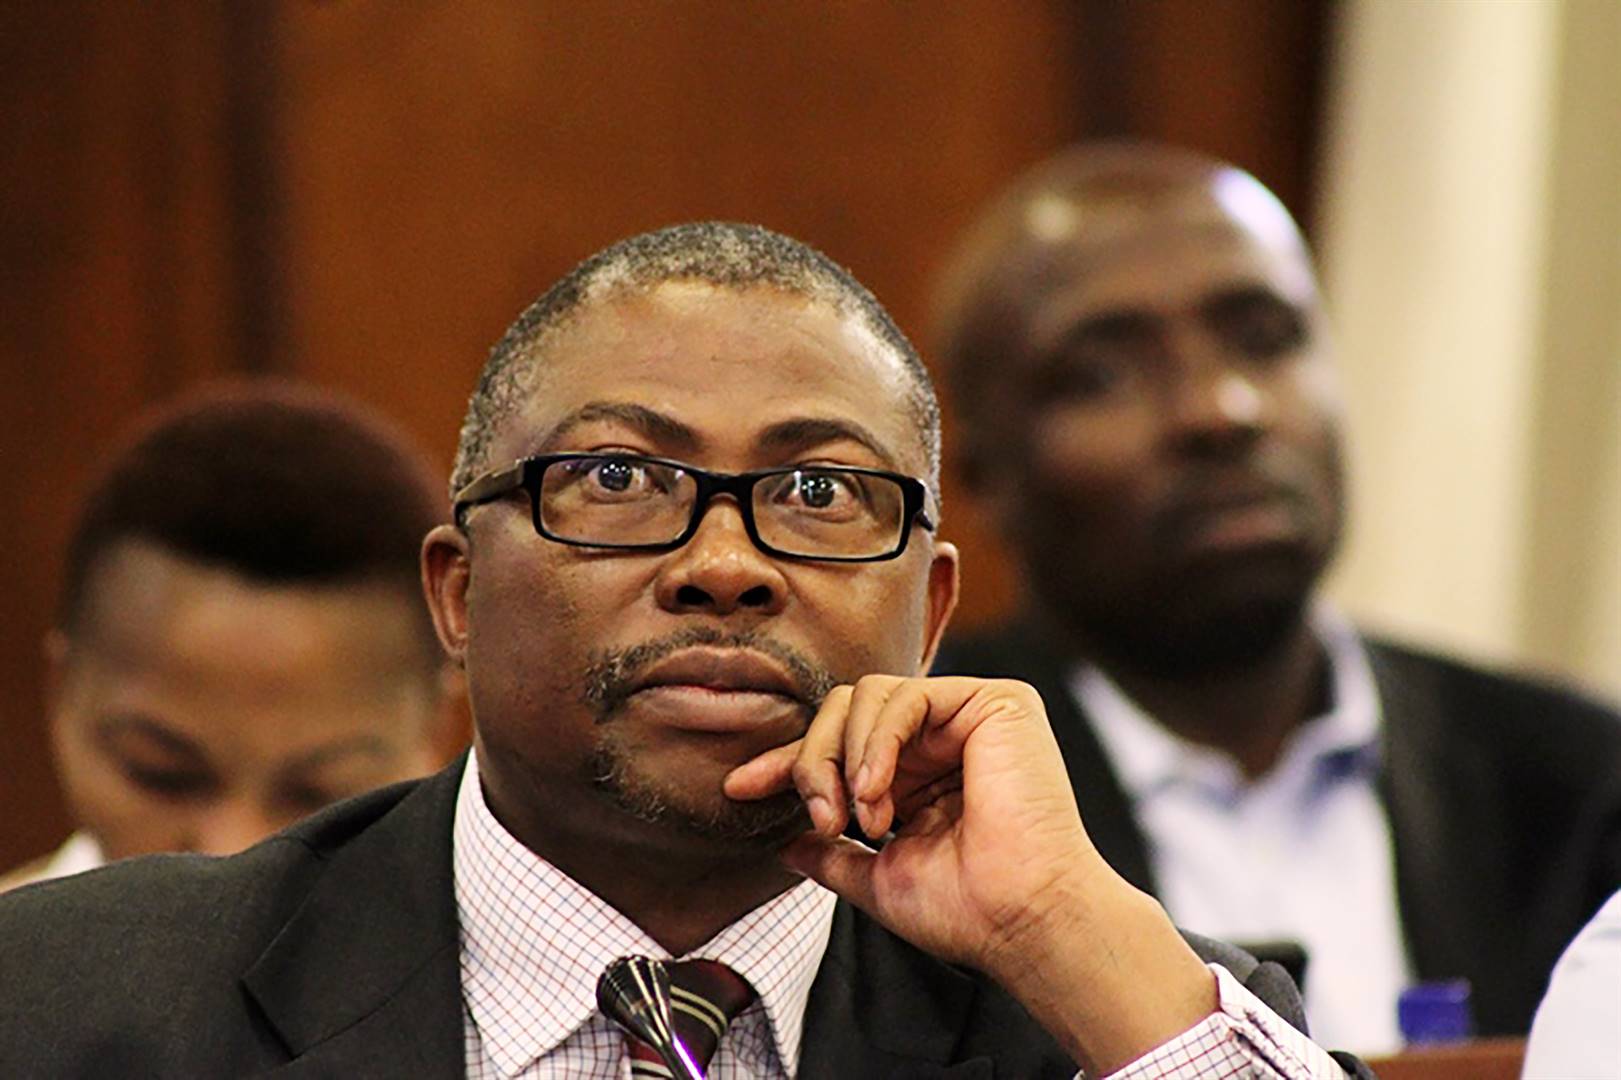 Transnet CEO Siyabonga Gama told MP’s that only Transnet management was vetted. Photo: Lindile Mbontsi